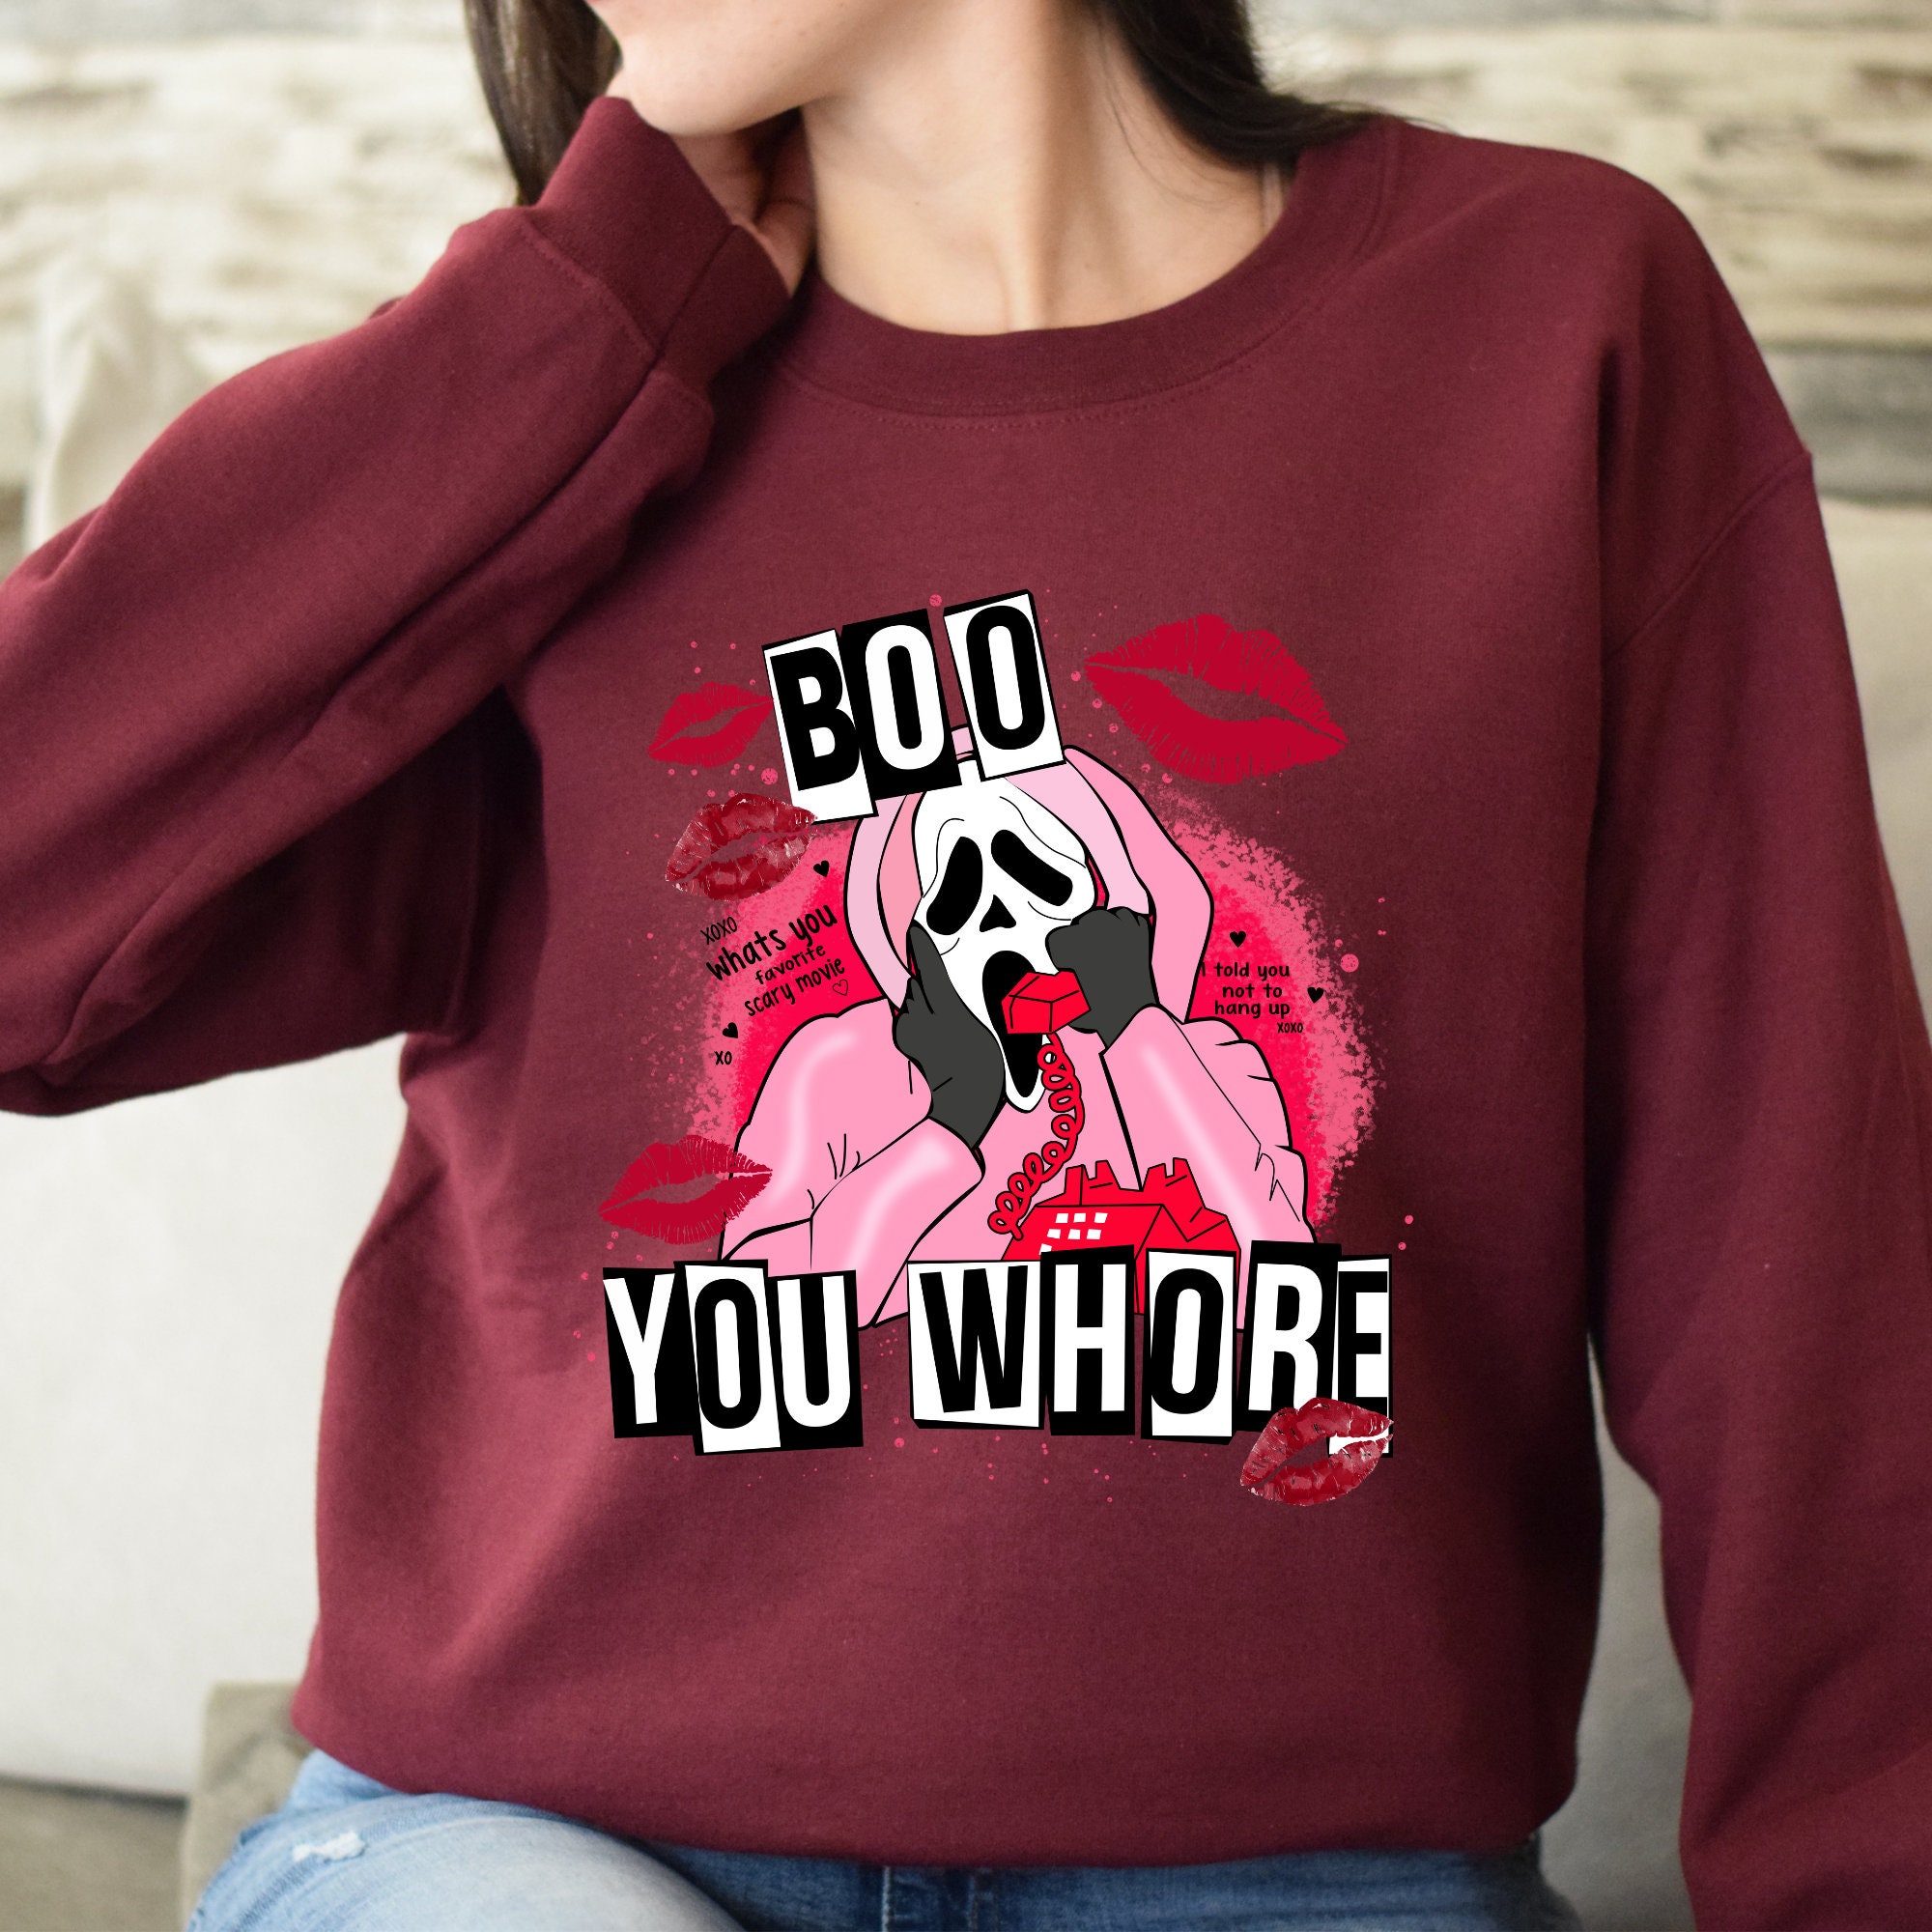 Discover Mean Girls "Boo You Whore" Sweatshirt: Valentine's Horror Movie Design with Spooky Bleached Look